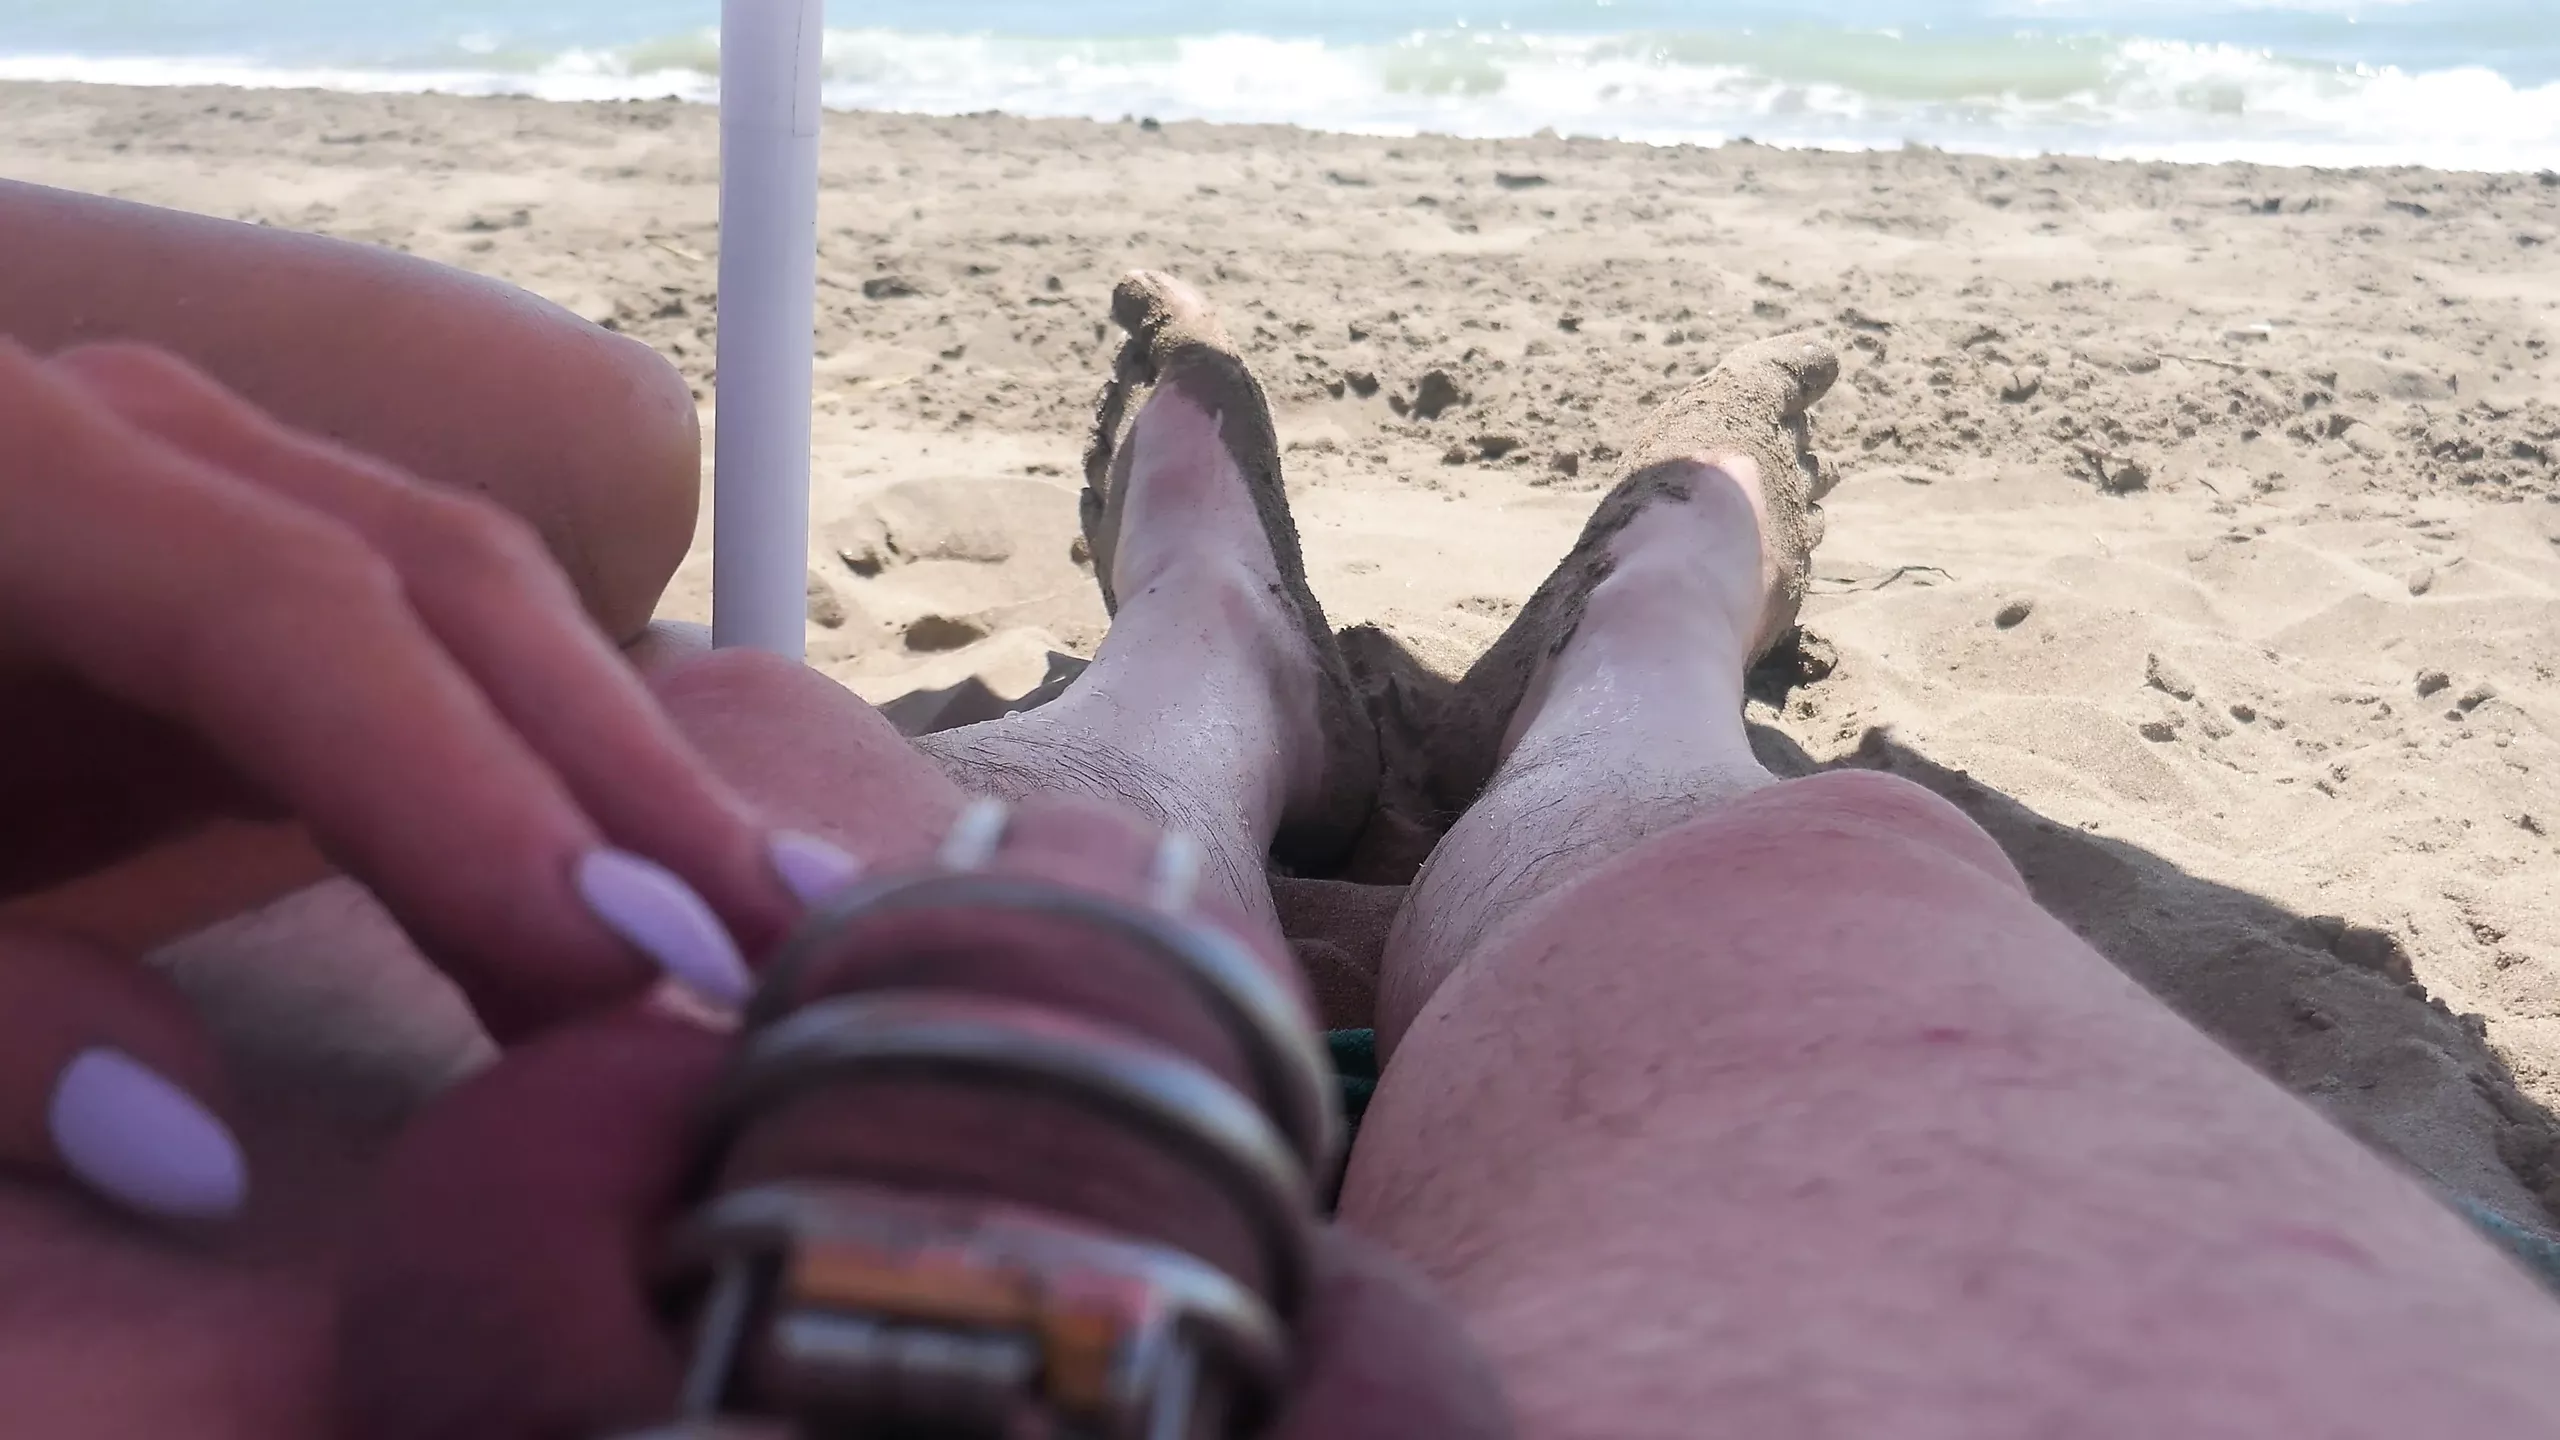 teasing in chastity on the beach pic